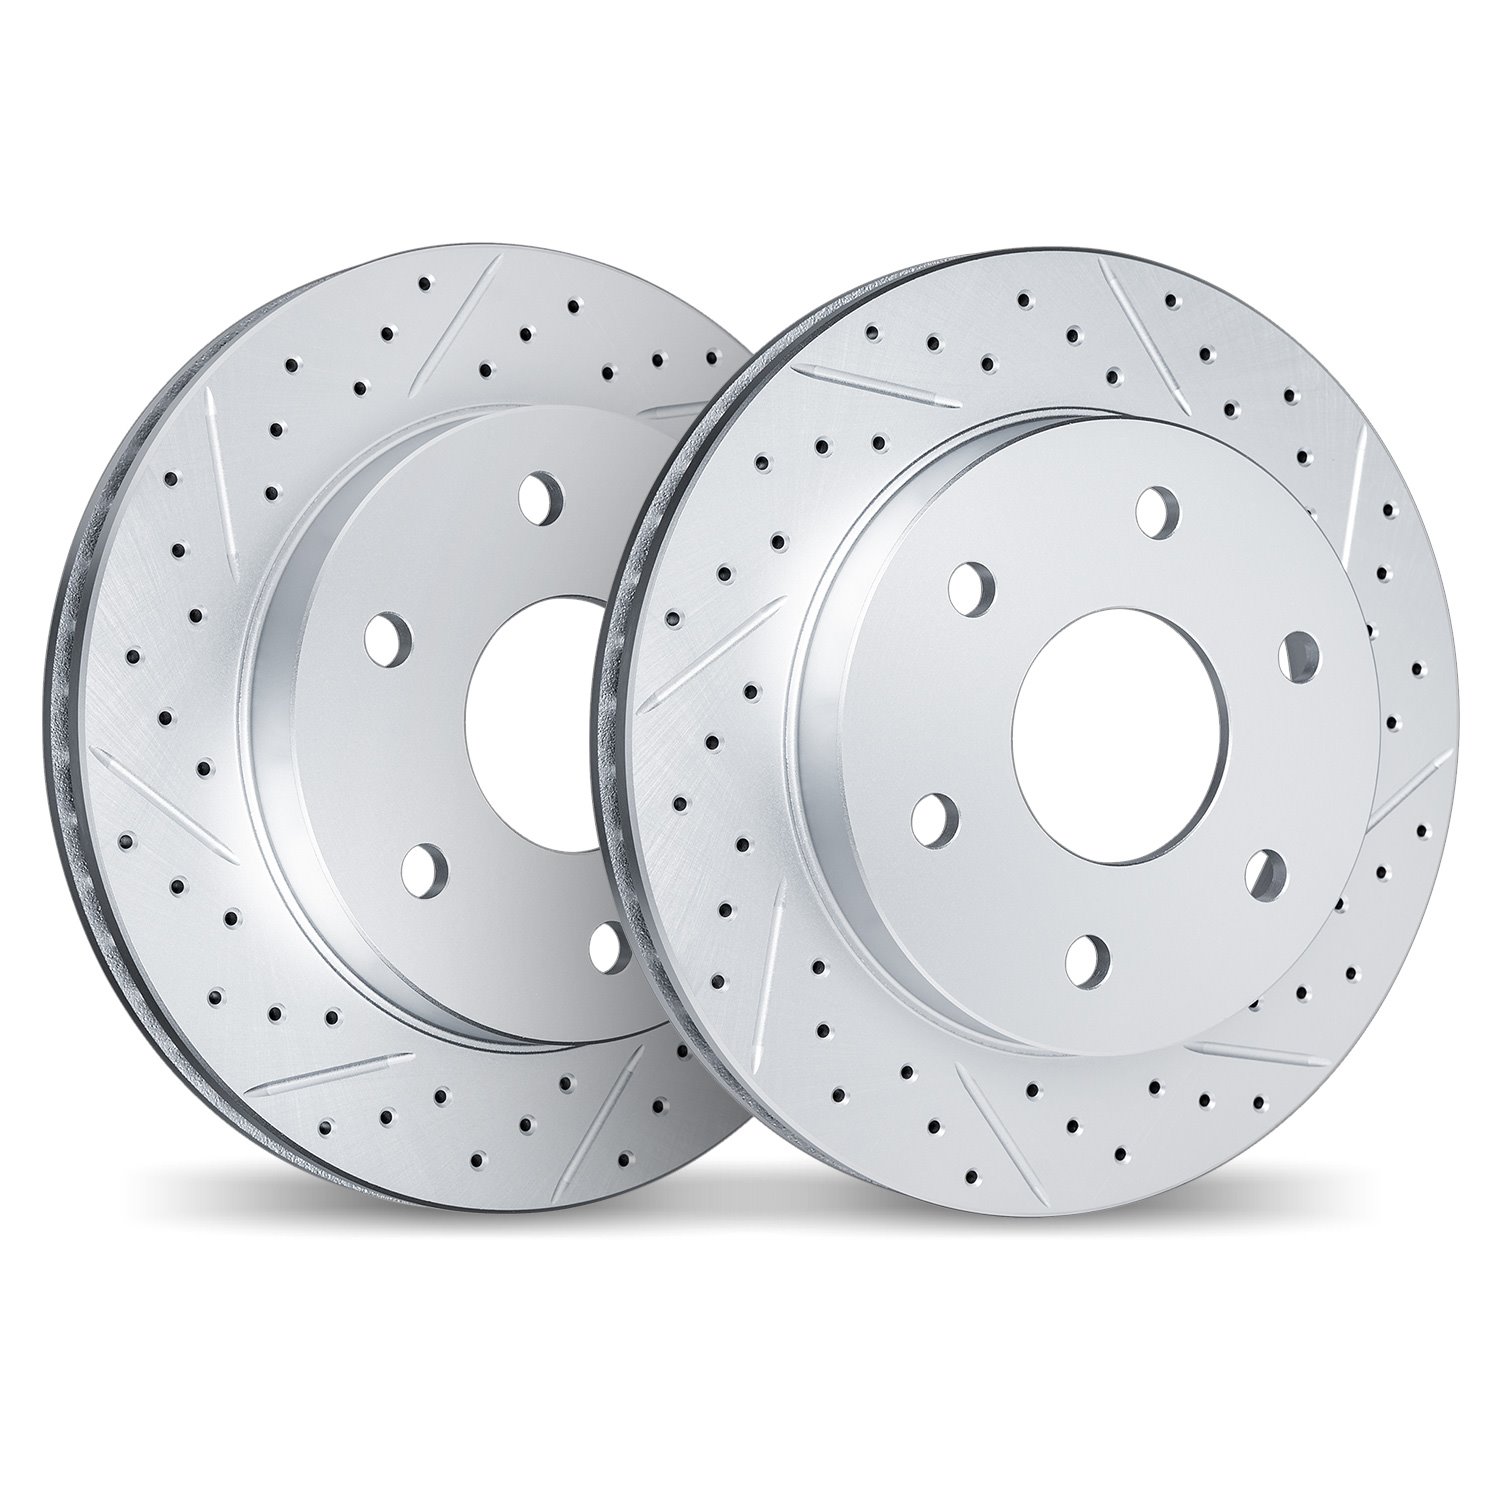 2002-76018 Geoperformance Drilled/Slotted Brake Rotors, 1986-1995 Lexus/Toyota/Scion, Position: Front